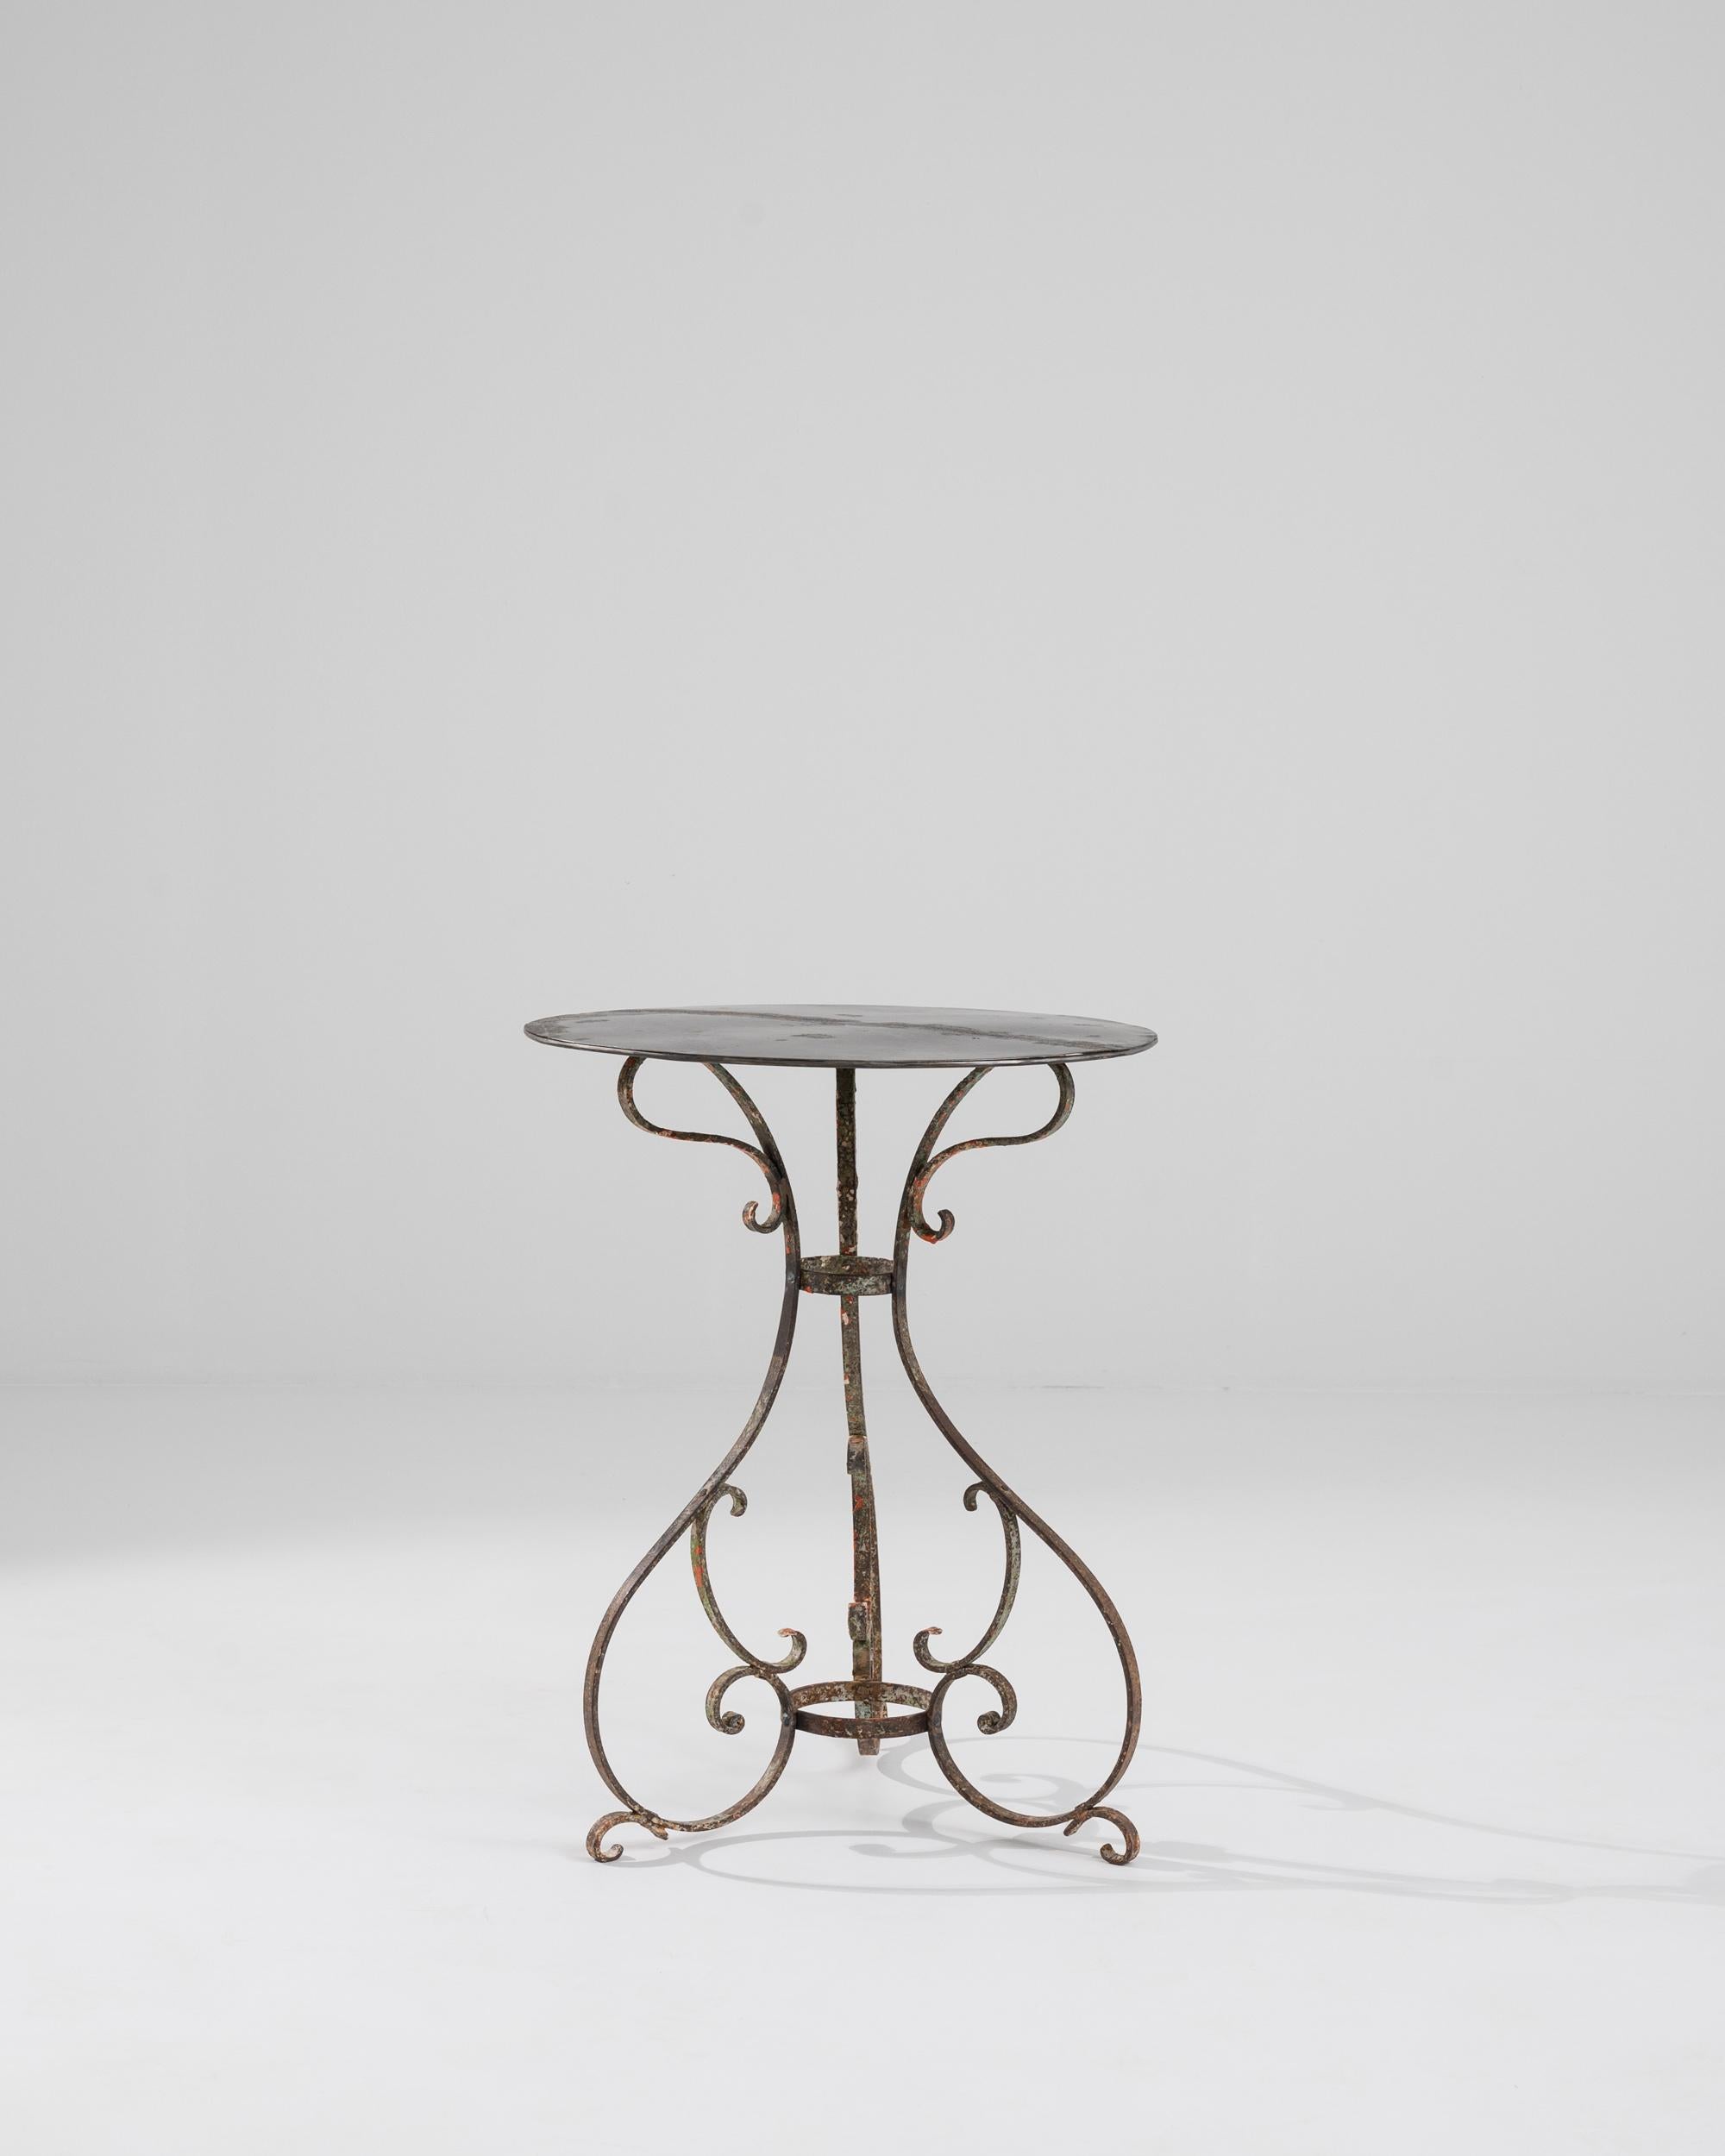 A metal table made in 1900s France. Three metal legs spiral downwards, creating a playfully animated pattern that undergirds this pleasant garden table. Reds, greens, and browns intermingle to form a curious patina, which is spread across its